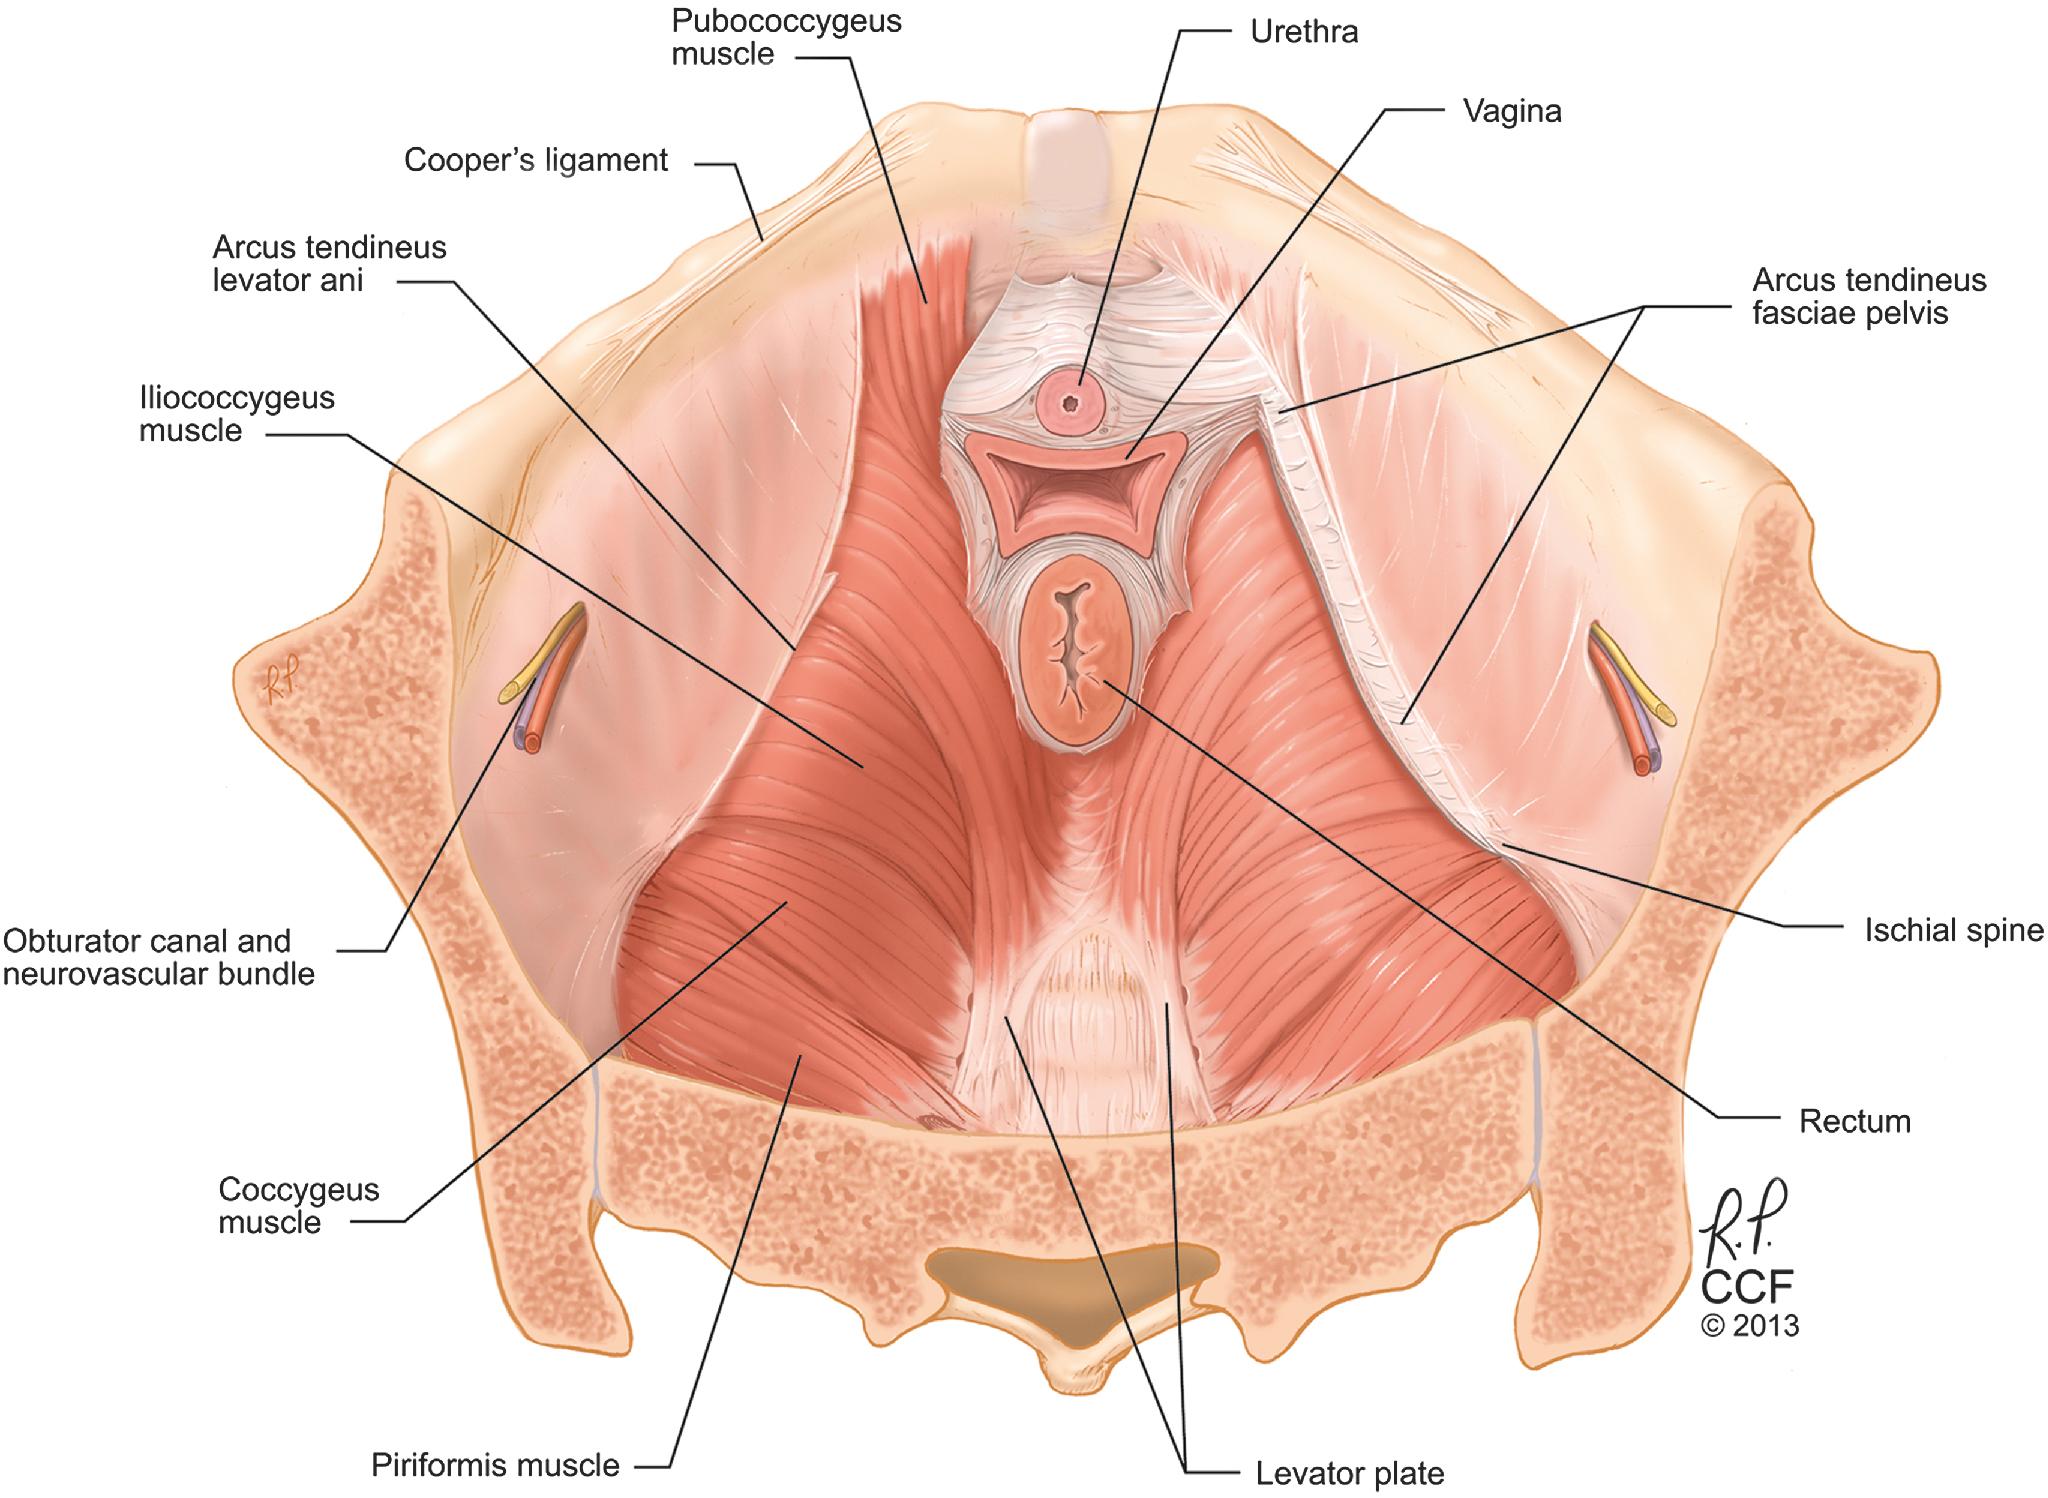 Fig. 1.2, The relationships of the muscles of the pelvic floor and sidewalls and their attachments from an abdominal view. The arcus tendineus fasciae pelvis has been removed on the left, showing the origins of the levator ani muscles. On the right, the arcus tendineus fasciae pelvis remains intact, showing the attachment of the lateral vagina via the endopelvic fascia (cut away).